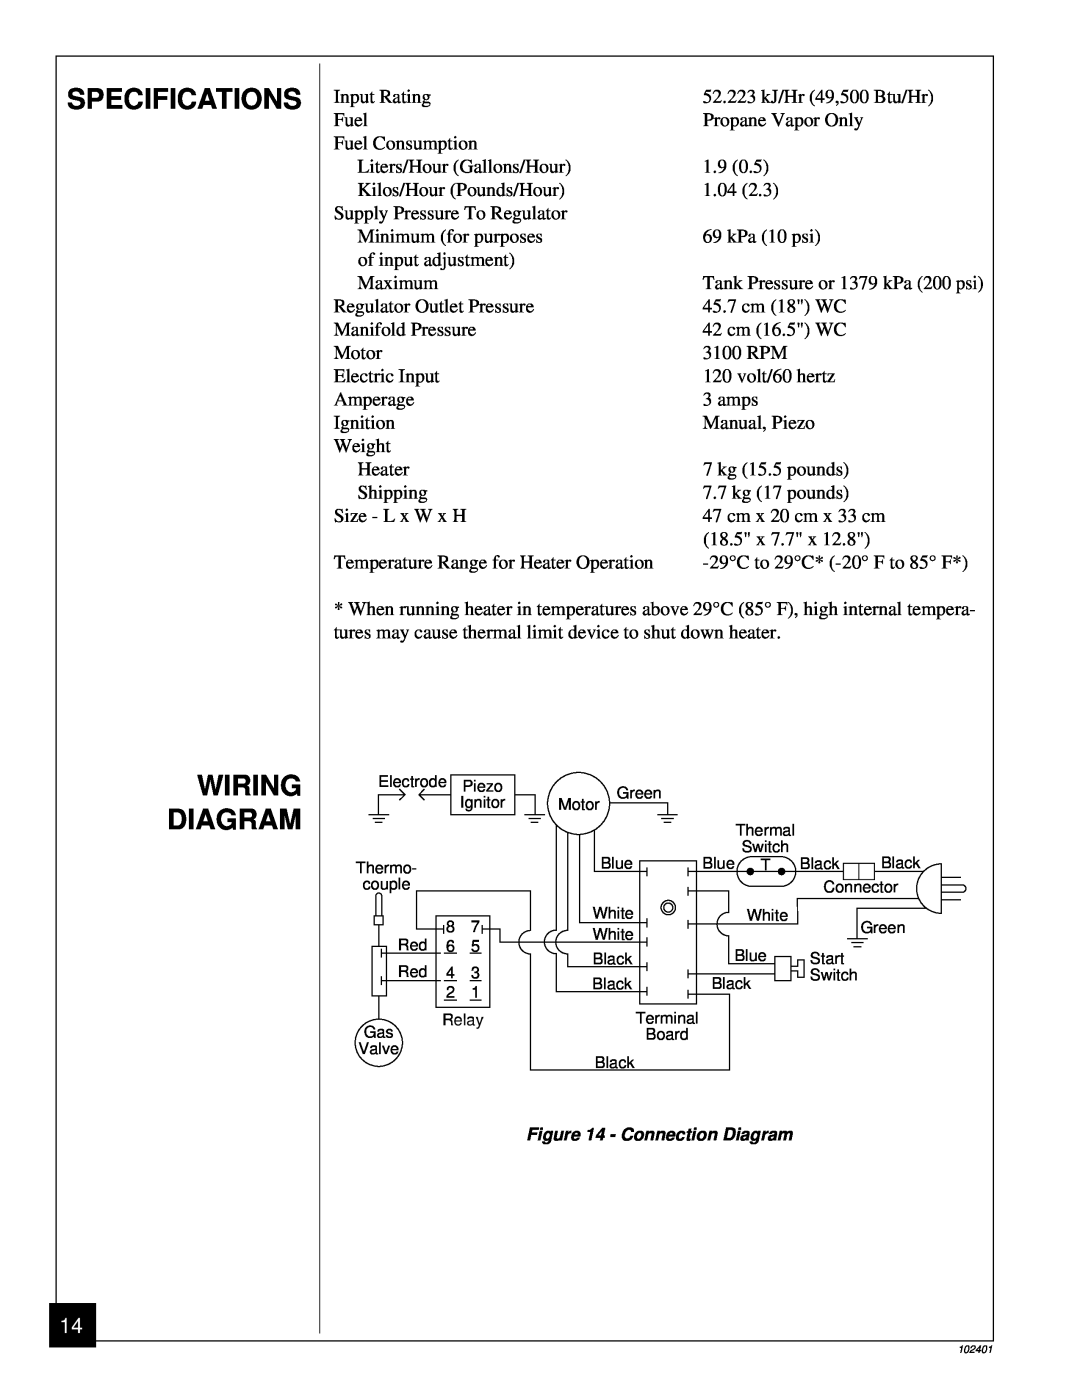 Desa RCLP50A owner manual Specifications, Wiring Diagram 